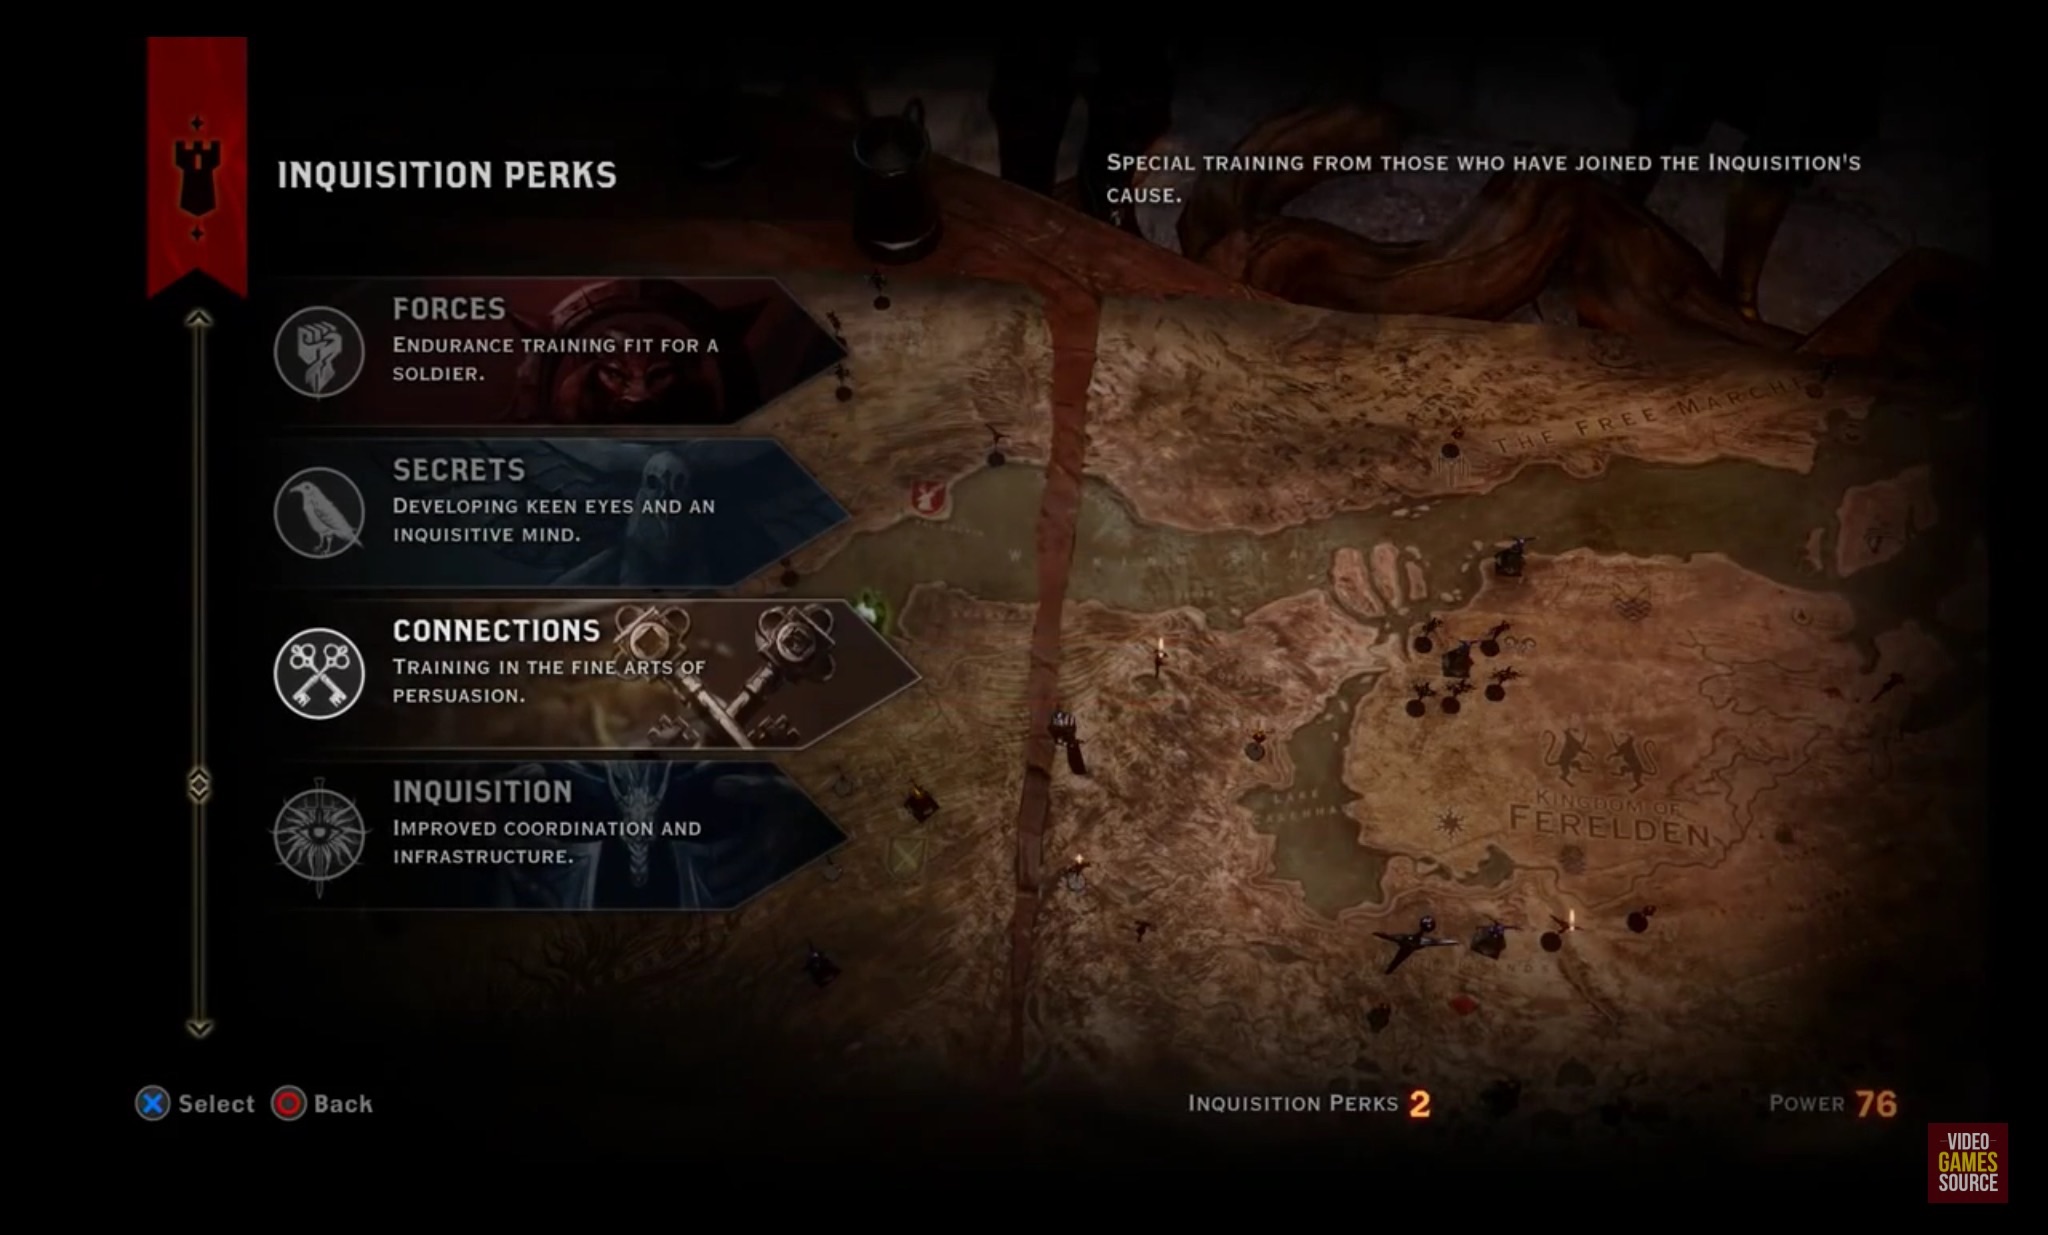 dragon age inquisition save editor operations